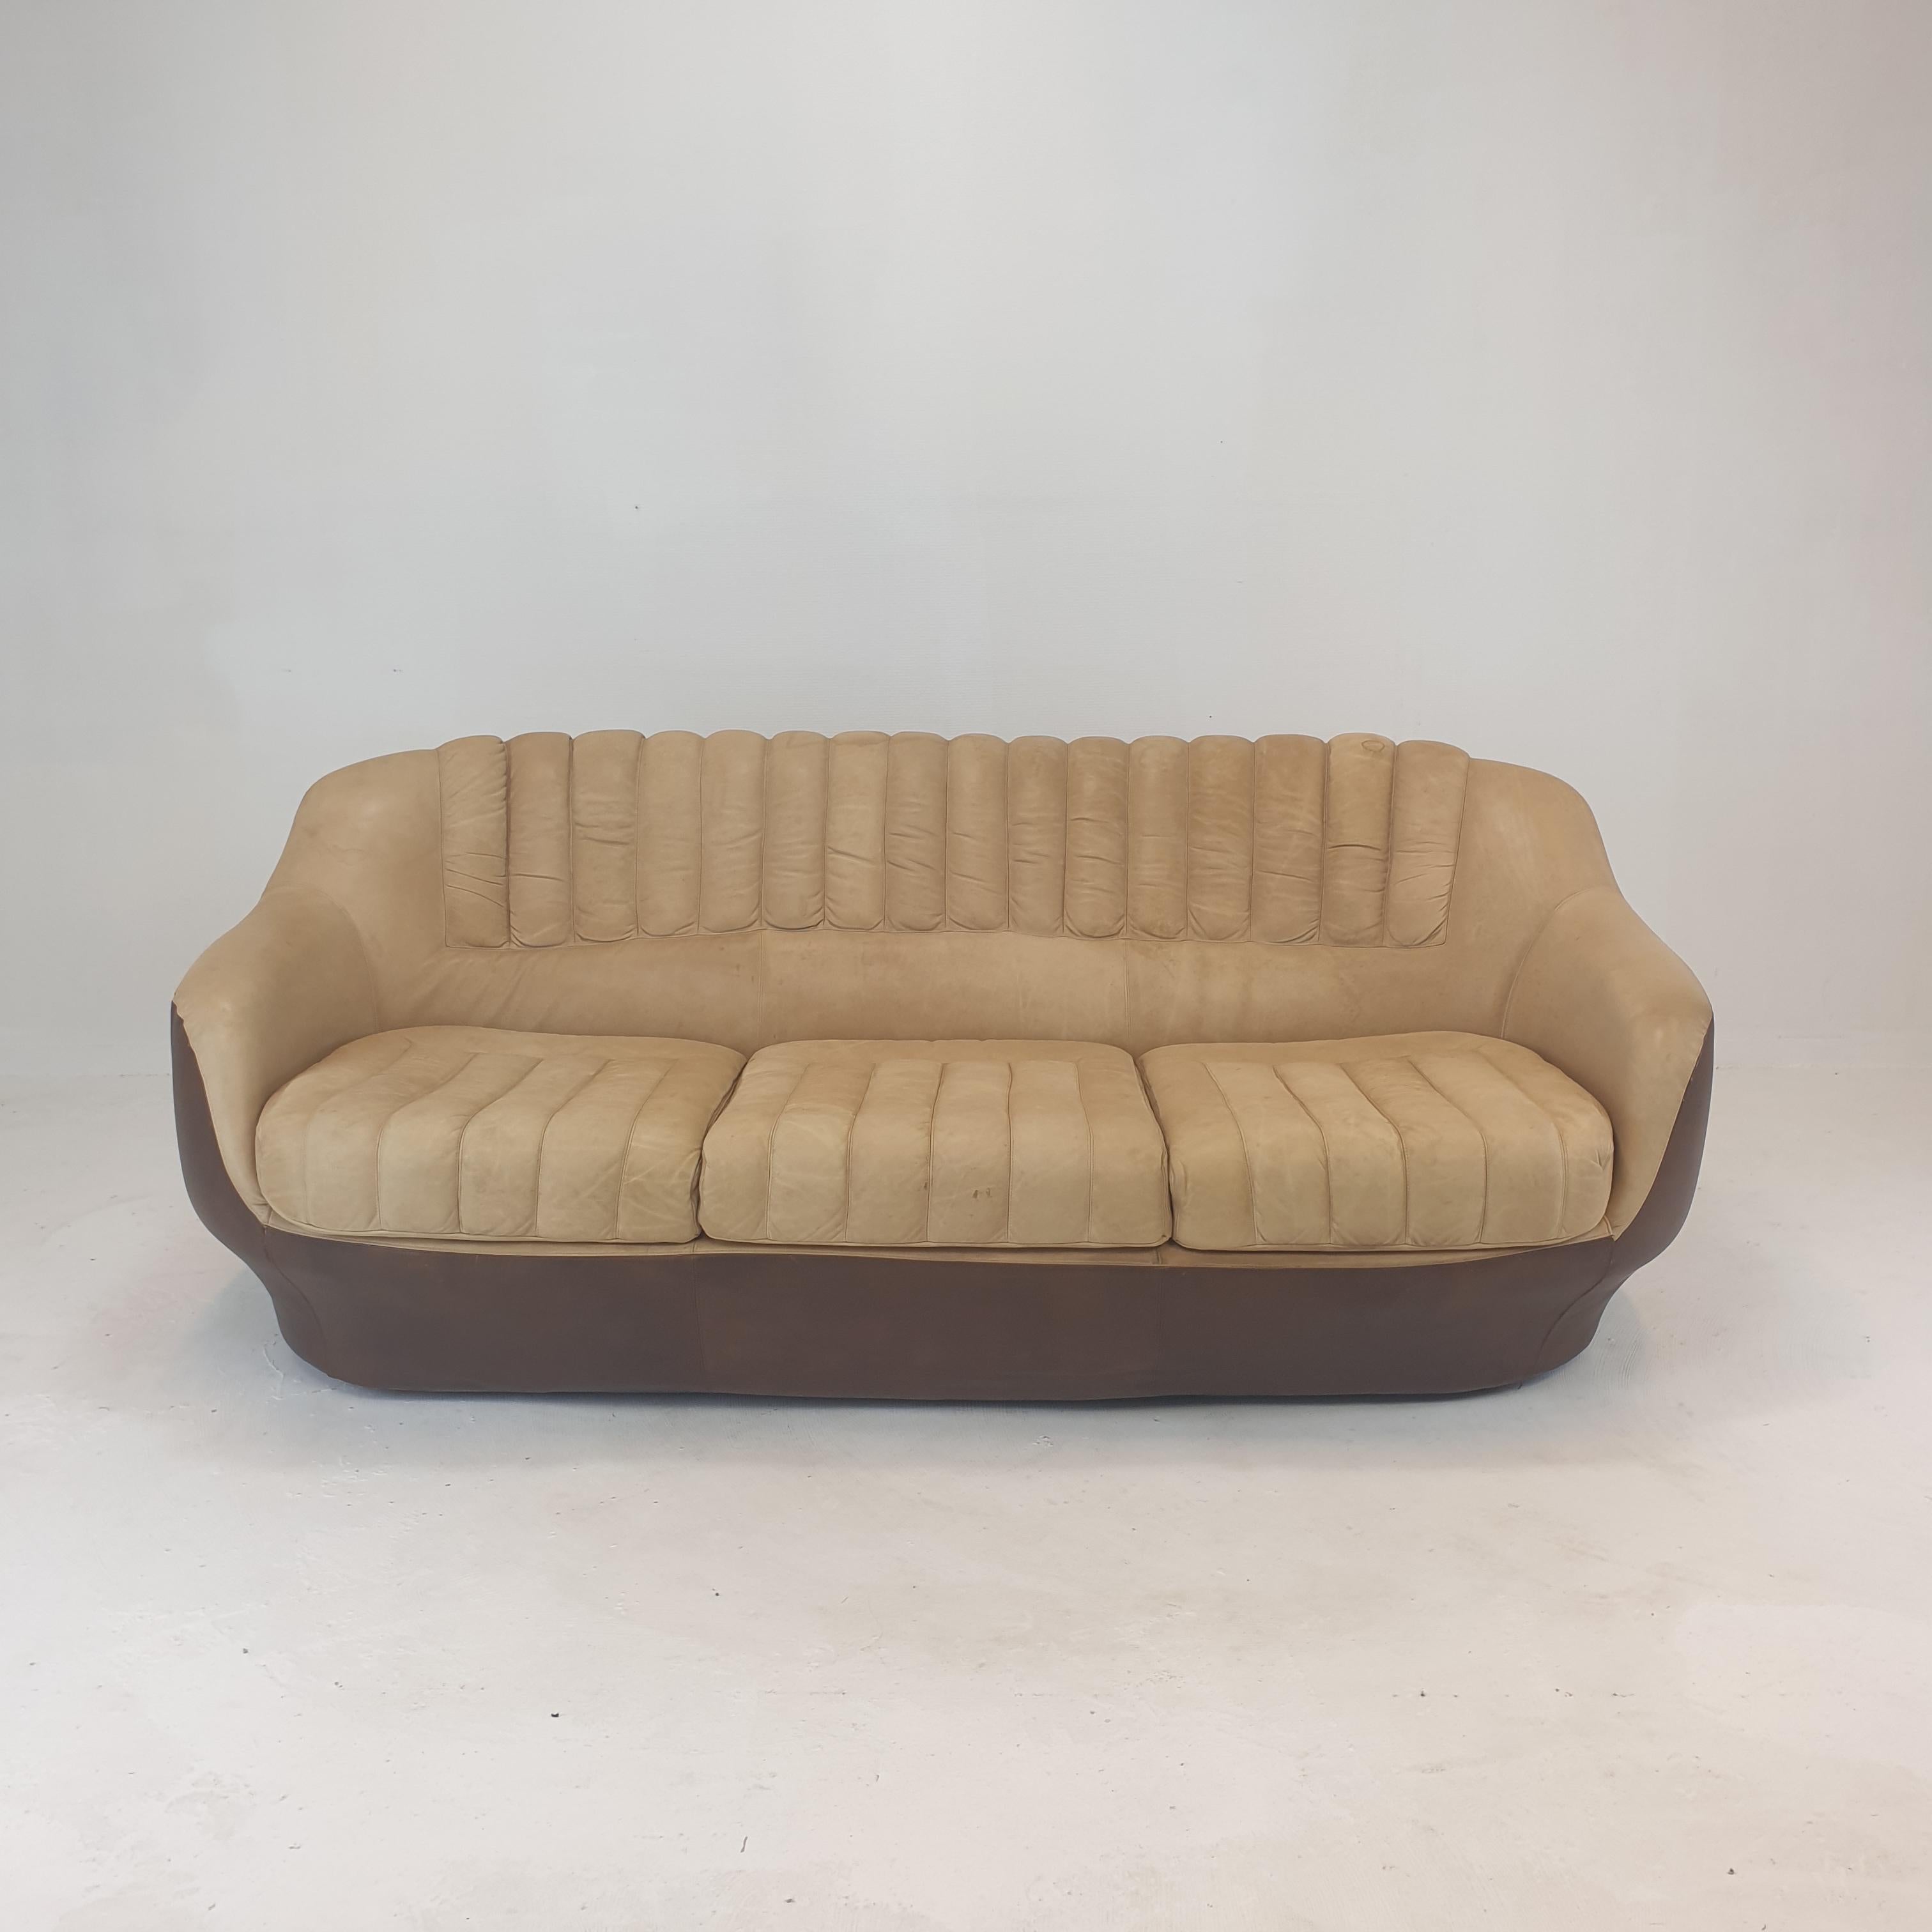 A magnificent leather Club sofa, made in Italy in the 70's.
The cushions and the backrest are covered with of very soft napa leather.
The high quality foam in the cushions guarantee a very comfortable seat.

The leather has a patina consistent